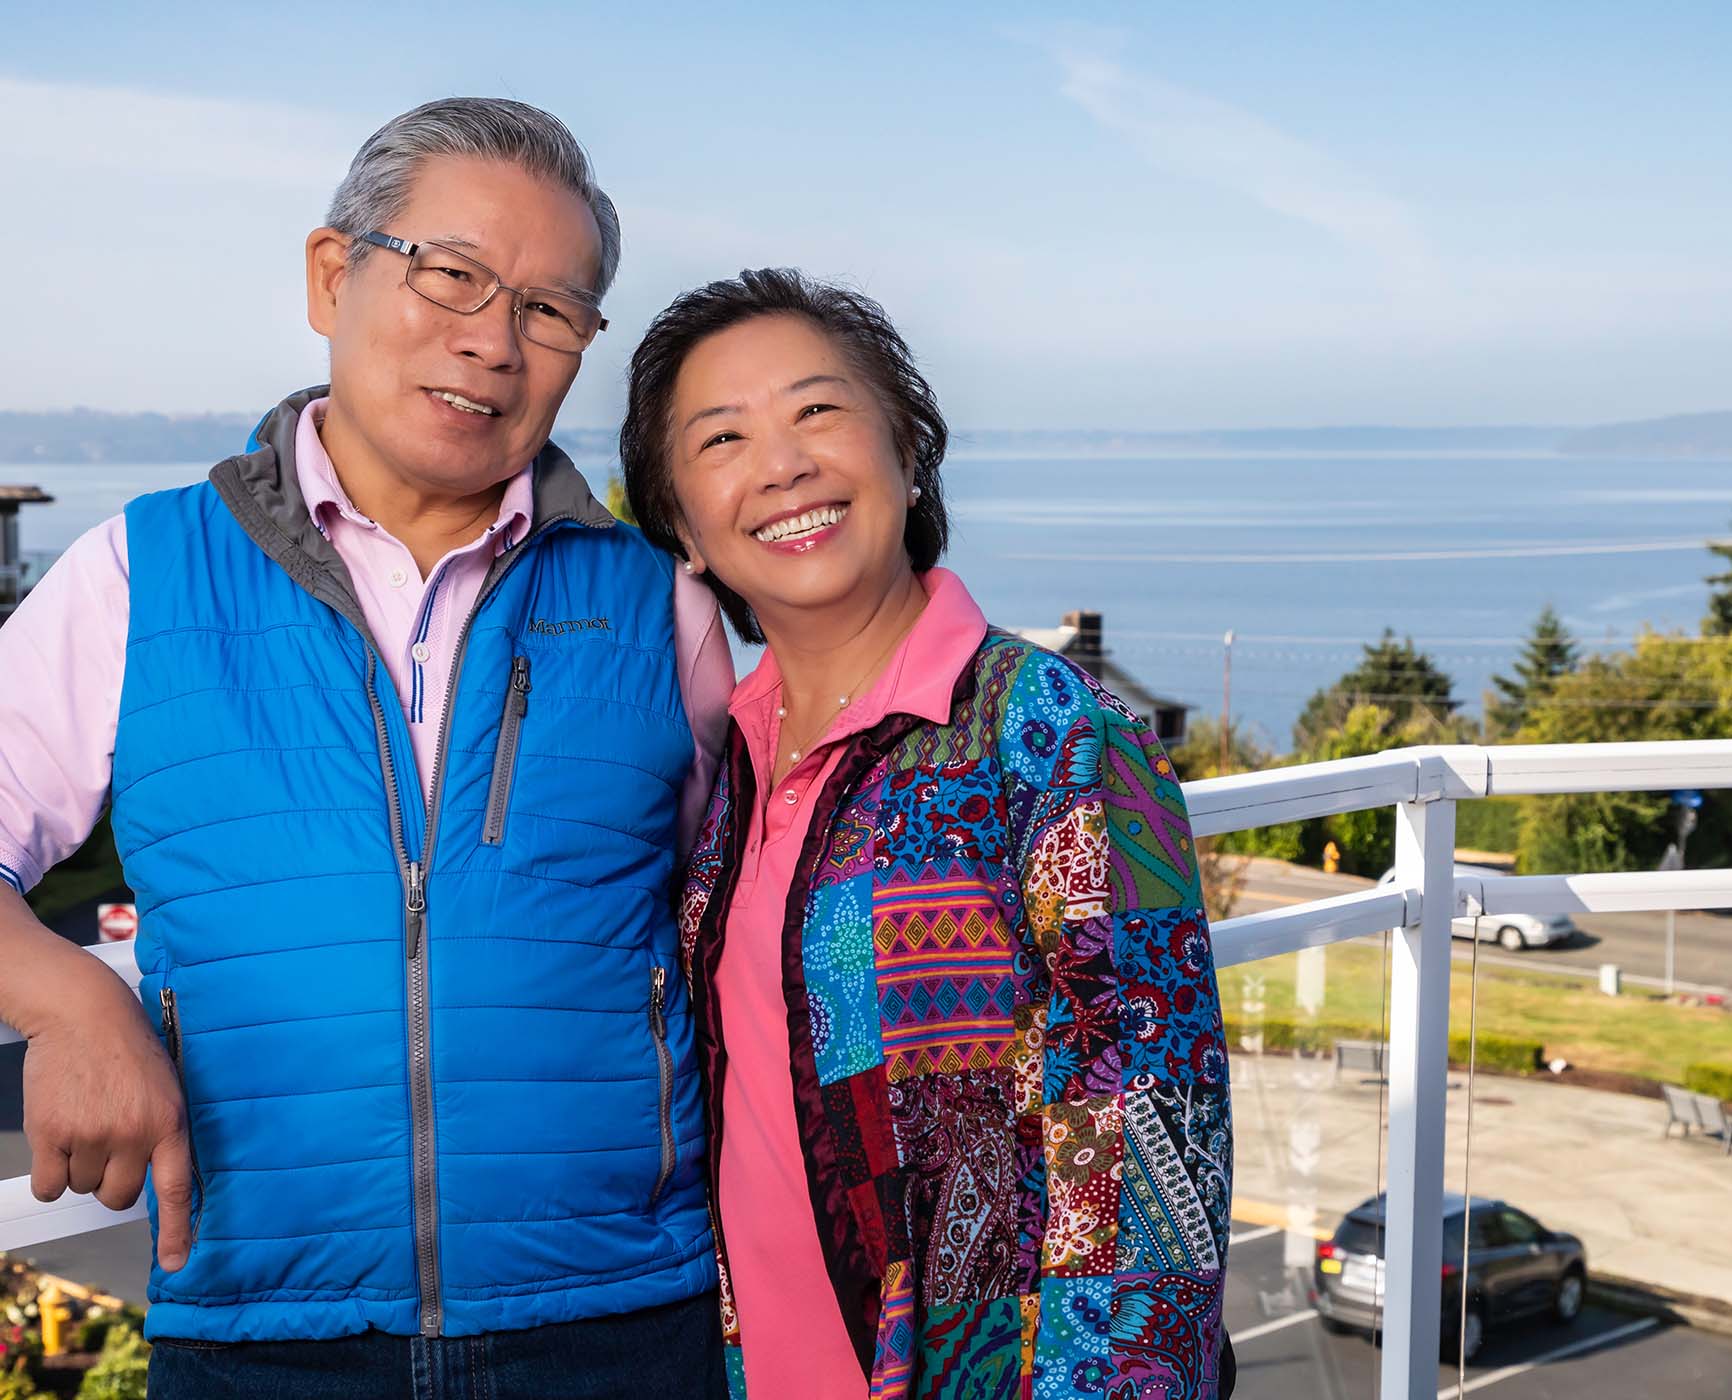 Smiling senior couple on a balcony at Judson Park overlooking the Puget Sound